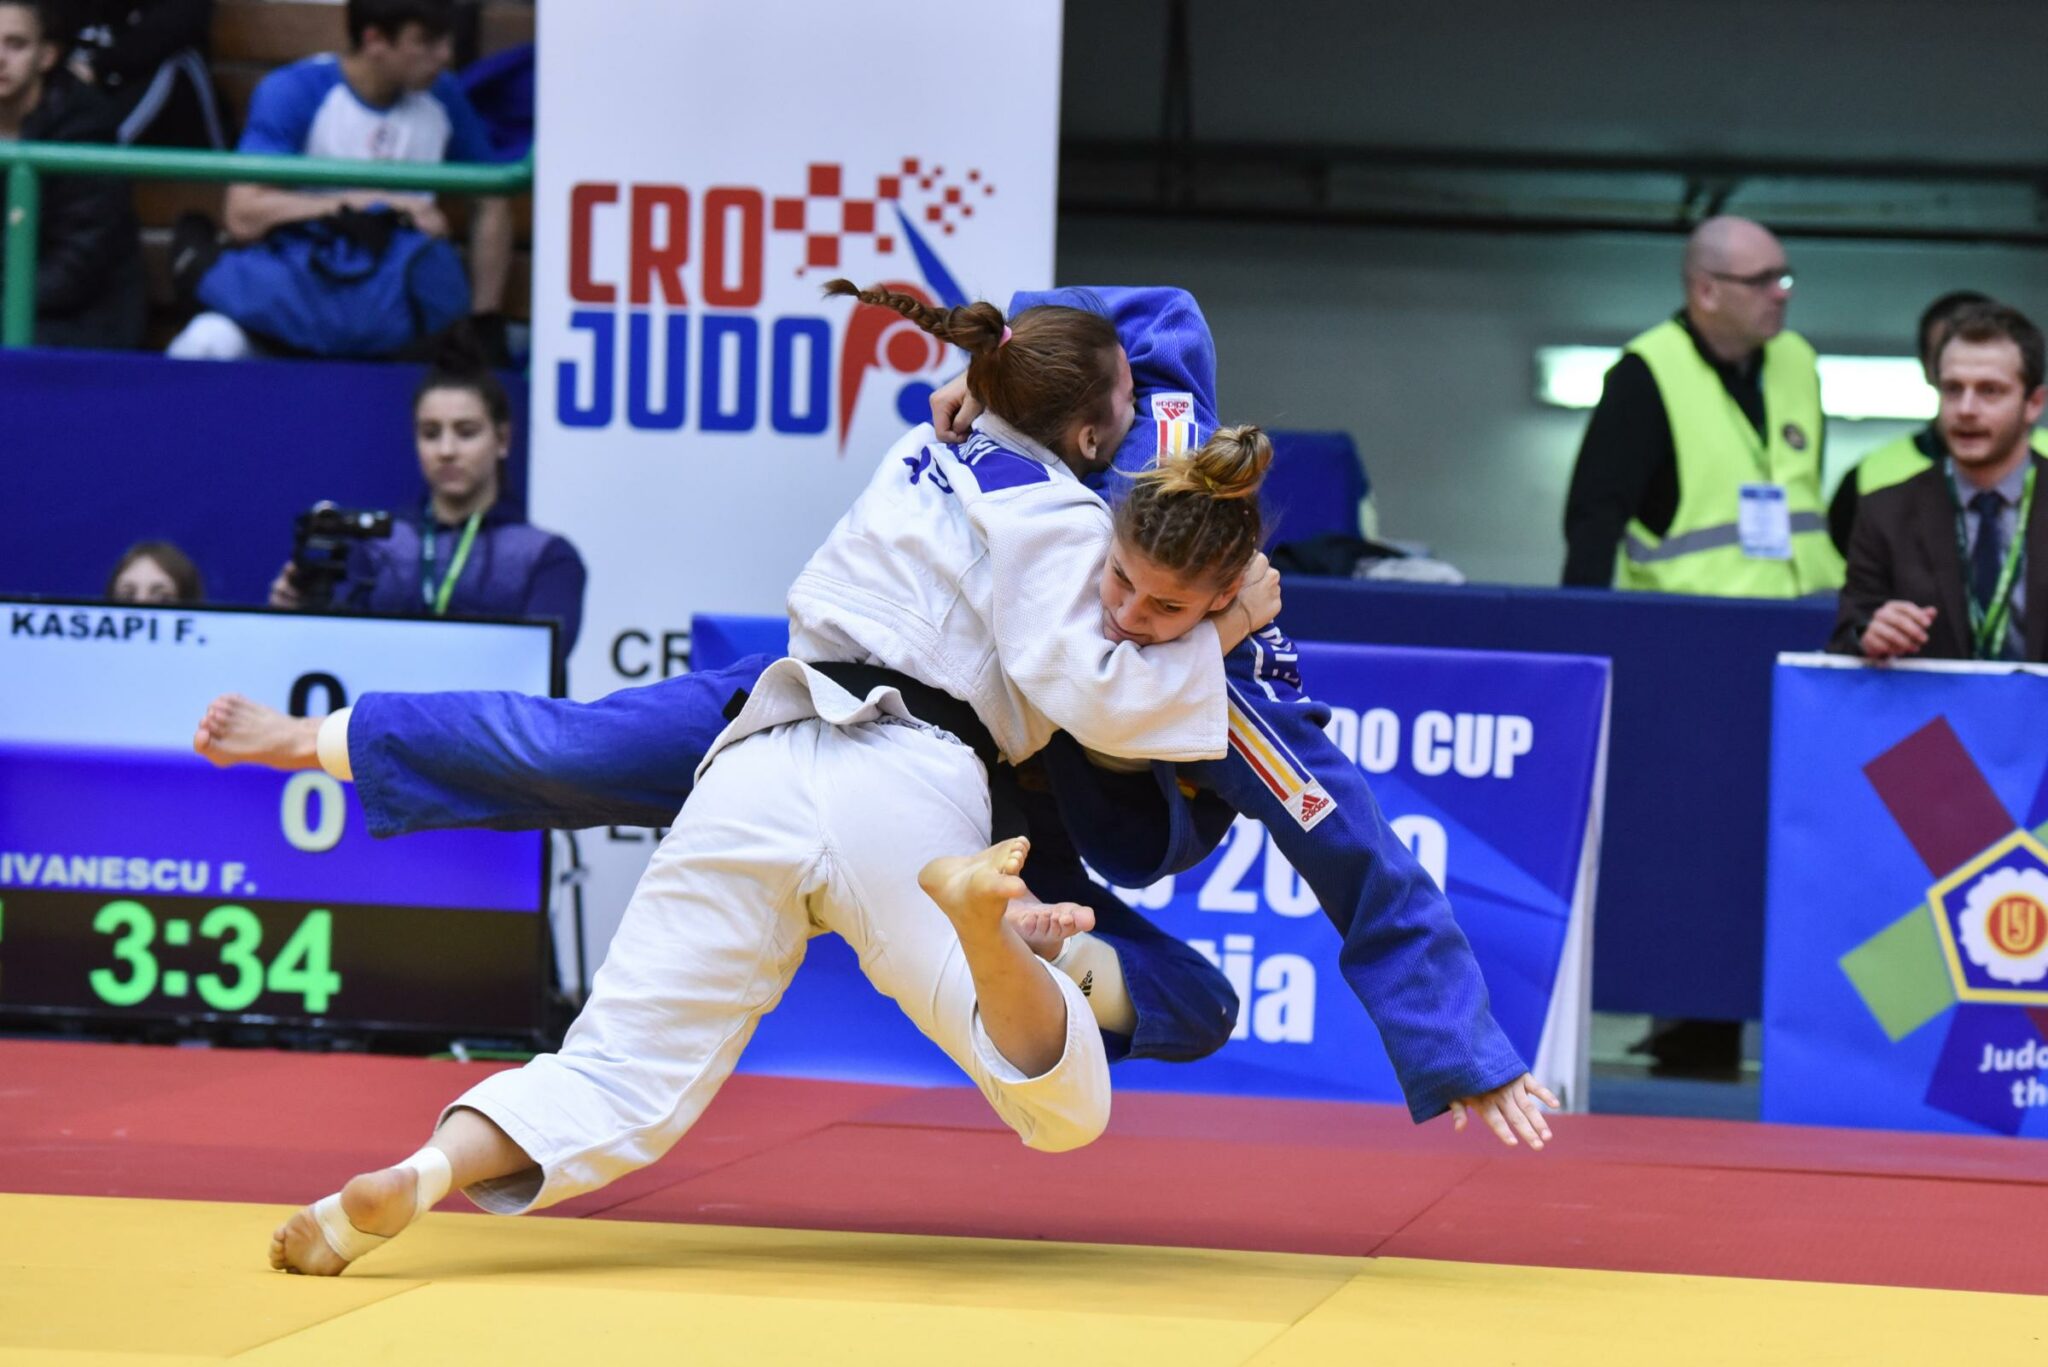 ZAGREB TO HOST INCREDIBLE NUMBER OF ATHLETES THIS WEEK FOR CADET EUROPEAN CUP